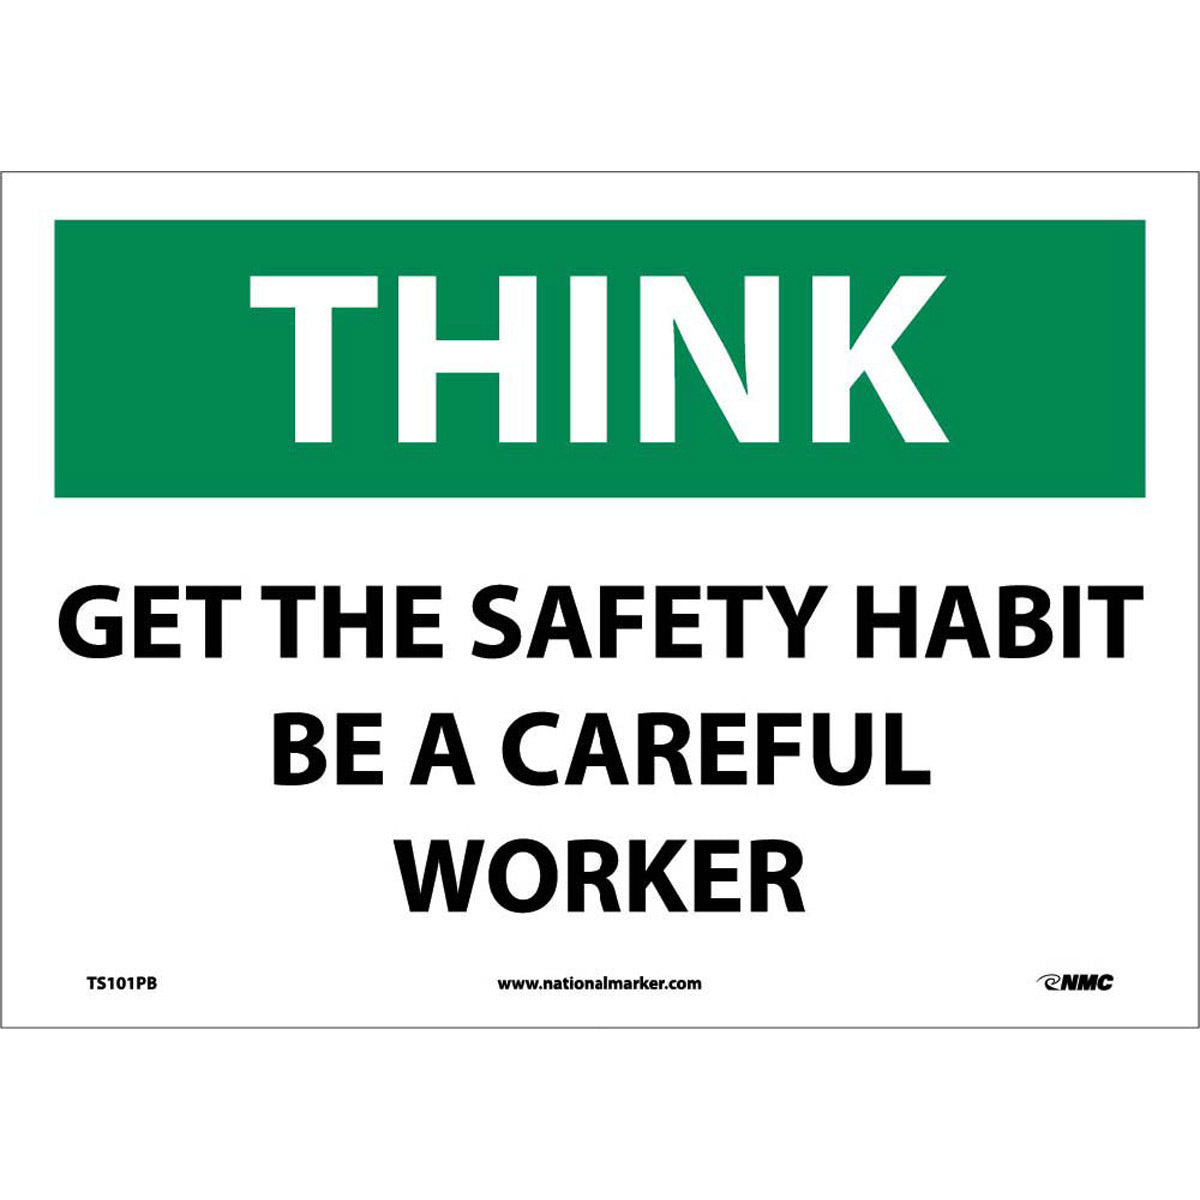 NM 10" X 14" White .0045" Pressure Sensitive Vinyl Office And Facility Sign "THINK GET THE SAFETY HABIT BE A CAREFUL WORKER"